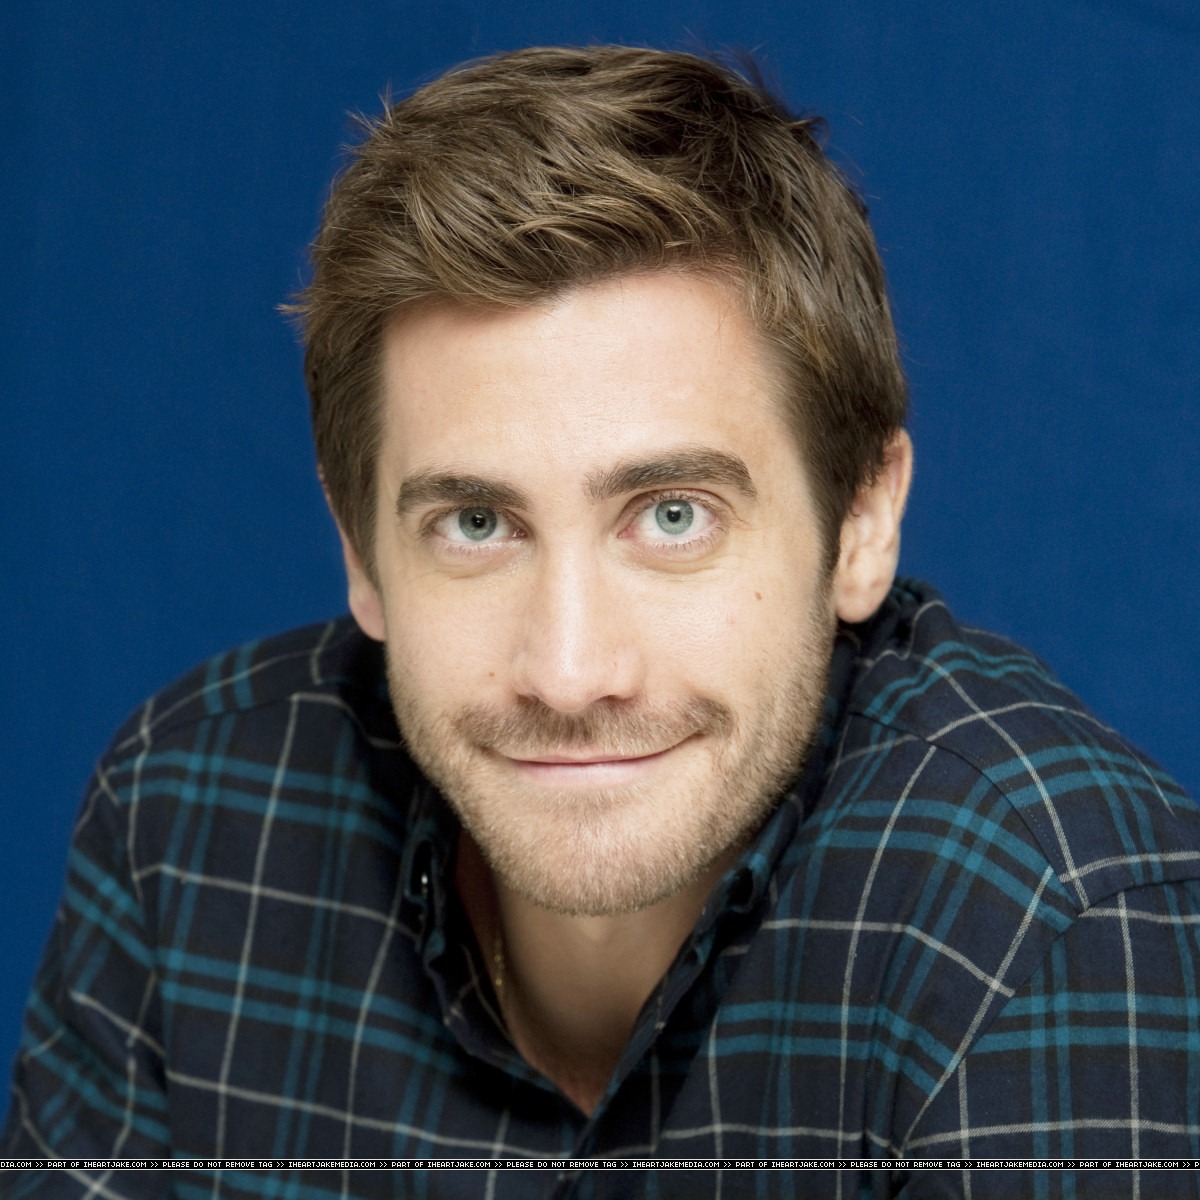 Jake Gyllenhaal in 'Love & Other Drugs' Press Conference.